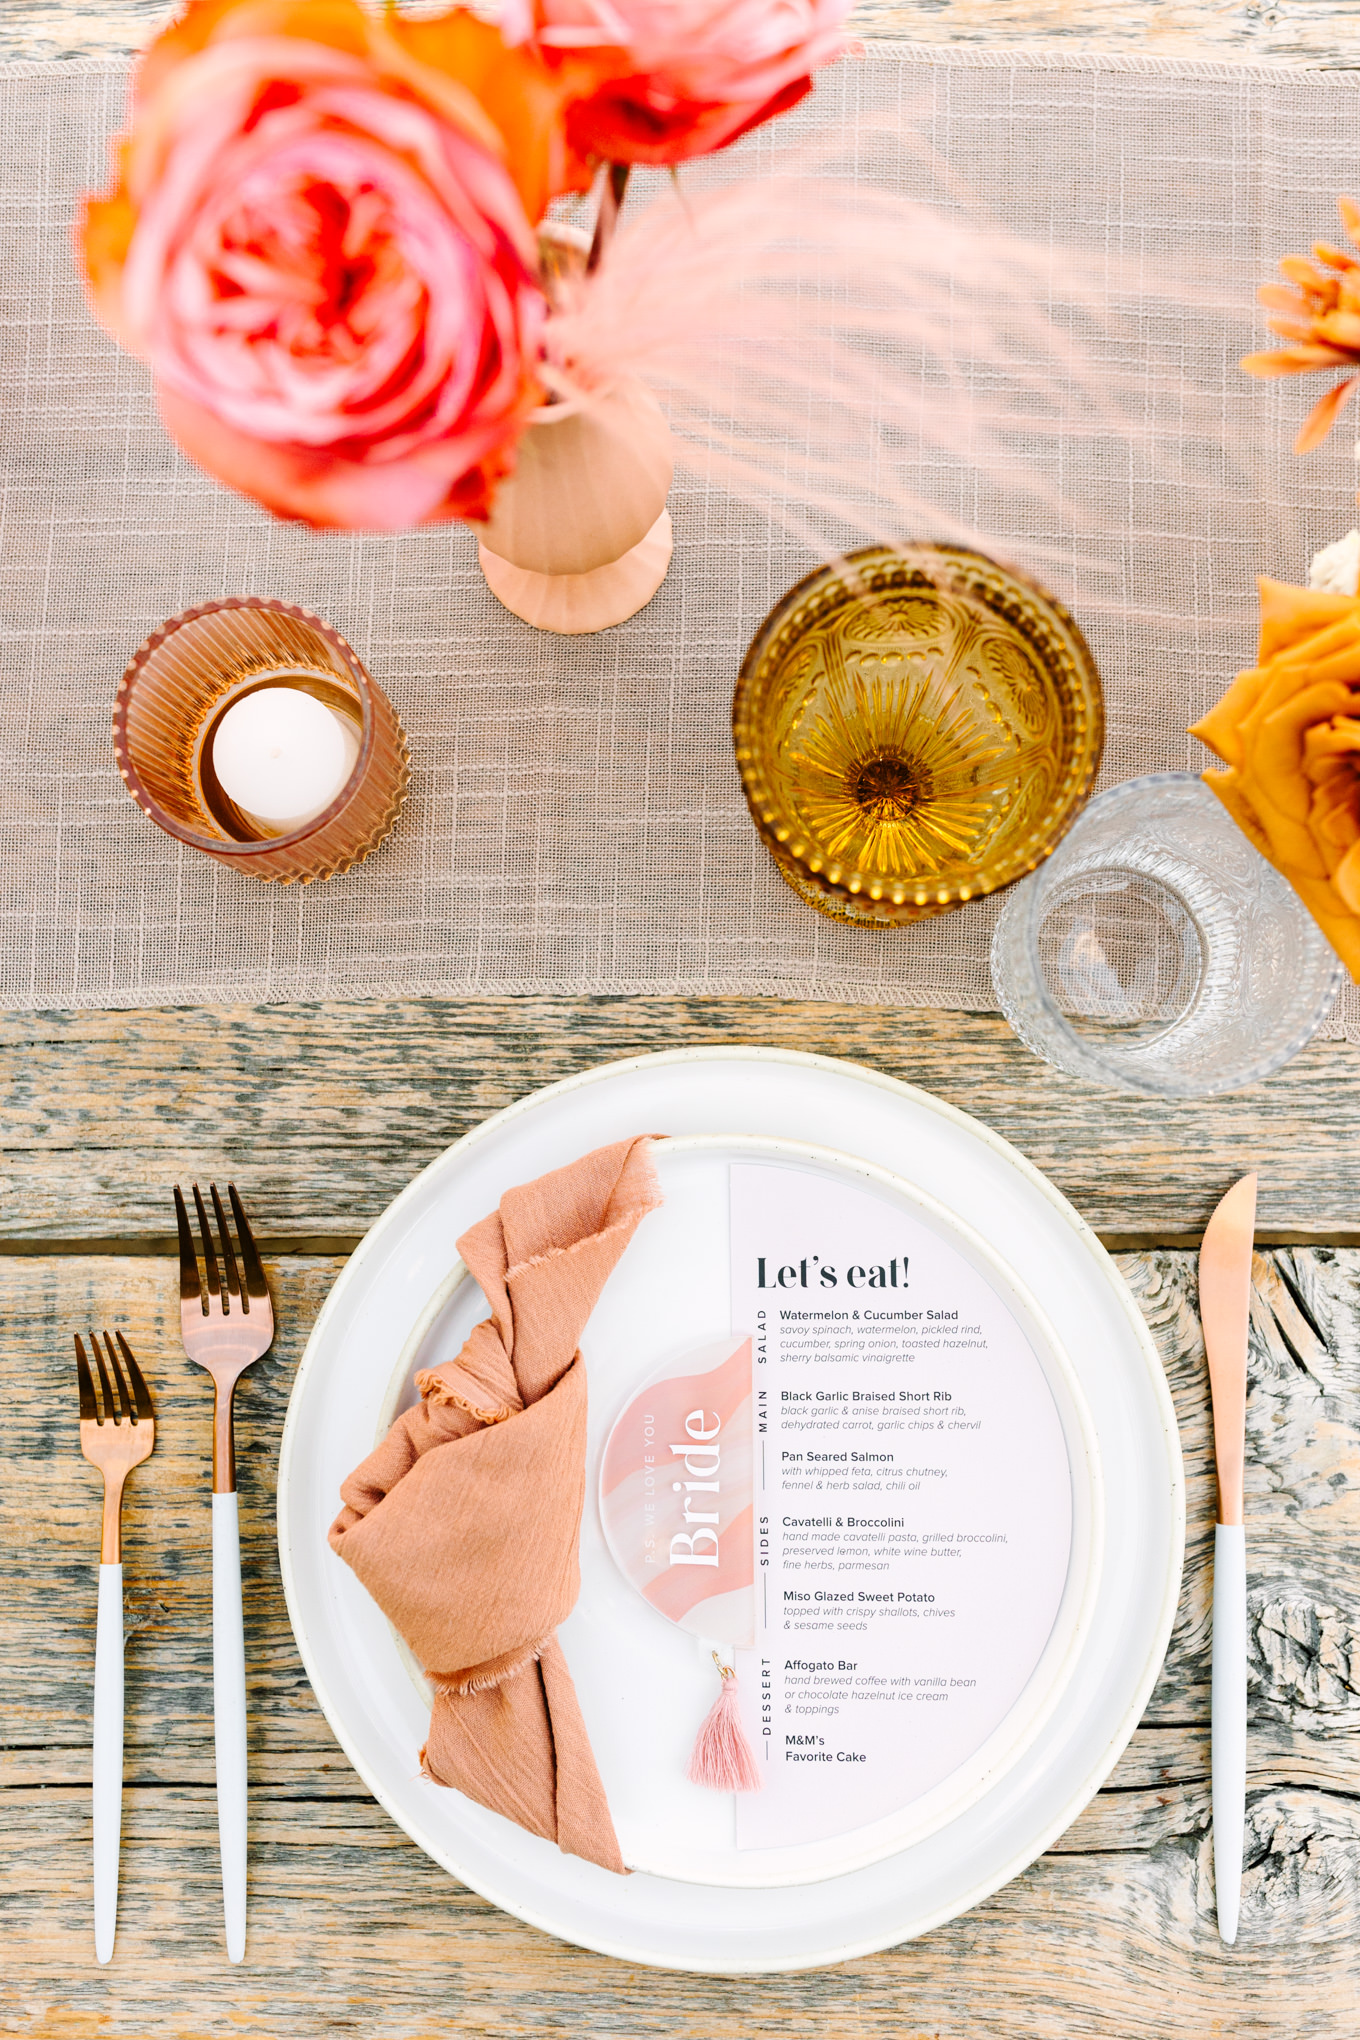 Overhead of plate at wedding reception | Pink and orange Lautner Compound wedding | Colorful Palm Springs wedding photography | #palmspringsphotographer #palmspringswedding #lautnercompound #southerncaliforniawedding  Source: Mary Costa Photography | Los Angeles